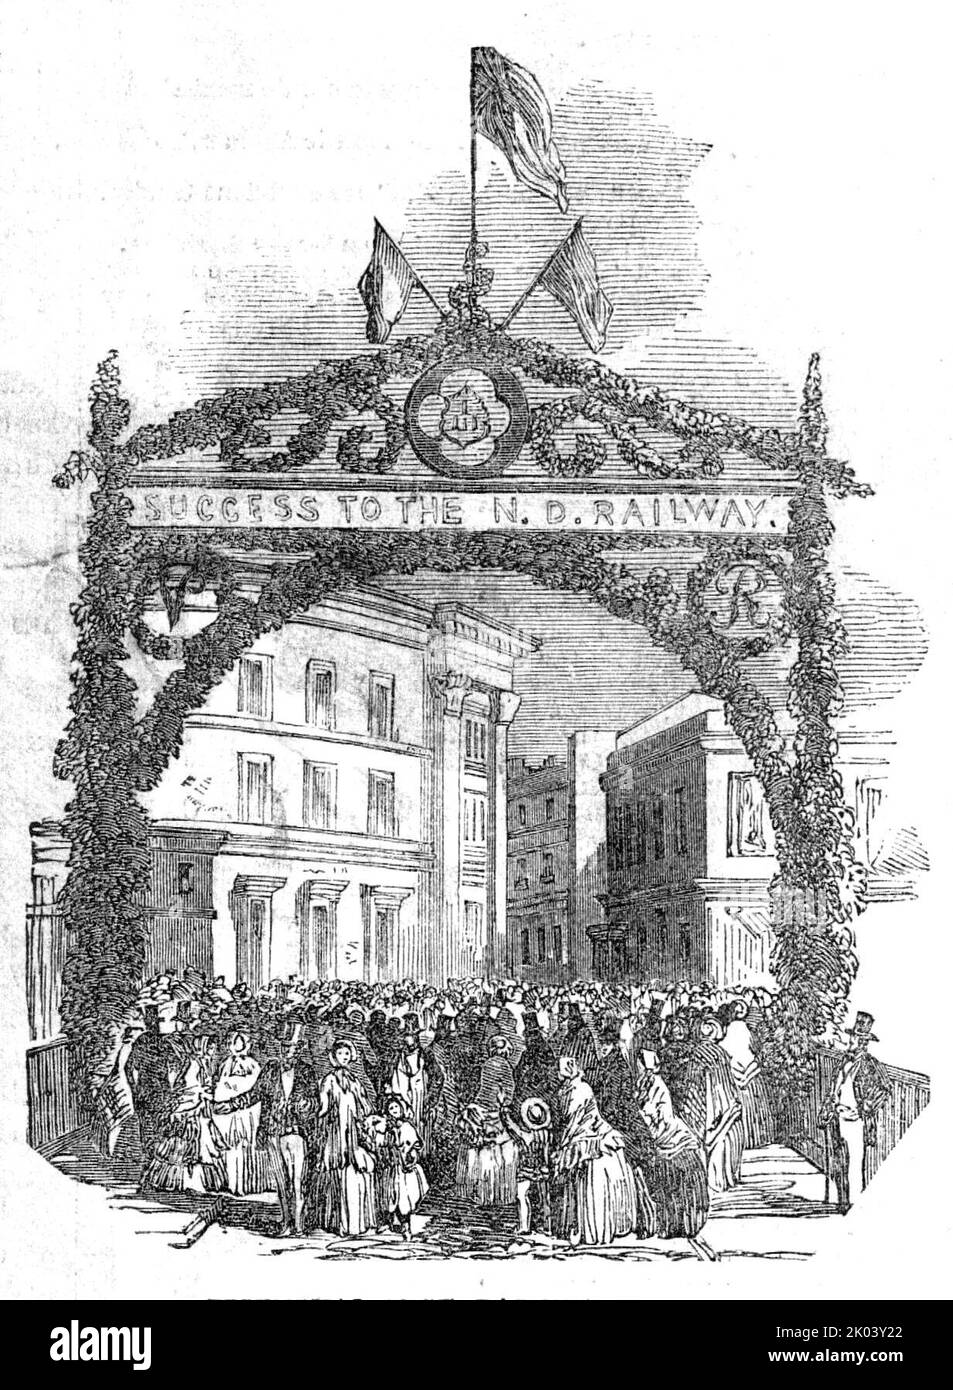 Triumphal Arch, Barnstaple-Bridge, 1854. Celebrations at the opening of the North Devon Railway. Festal arch with sign reading: 'Success to the N. D. Railway'. 'The day was set aside for general rejoicing throughout the whole district...A procession, headed by a troop of the North Devon Mounted Rifles, then formed, which included the Mayors and Town-councils of Exeter, Barnstaple, Bideford, Torrington, Southmolton, the Lodge of Odd Fellows and Freemasons, trades unions, railway directors, magistrates and gentry of the county, accompanied by several bands of music, and appropriate flags, banner Stock Photo